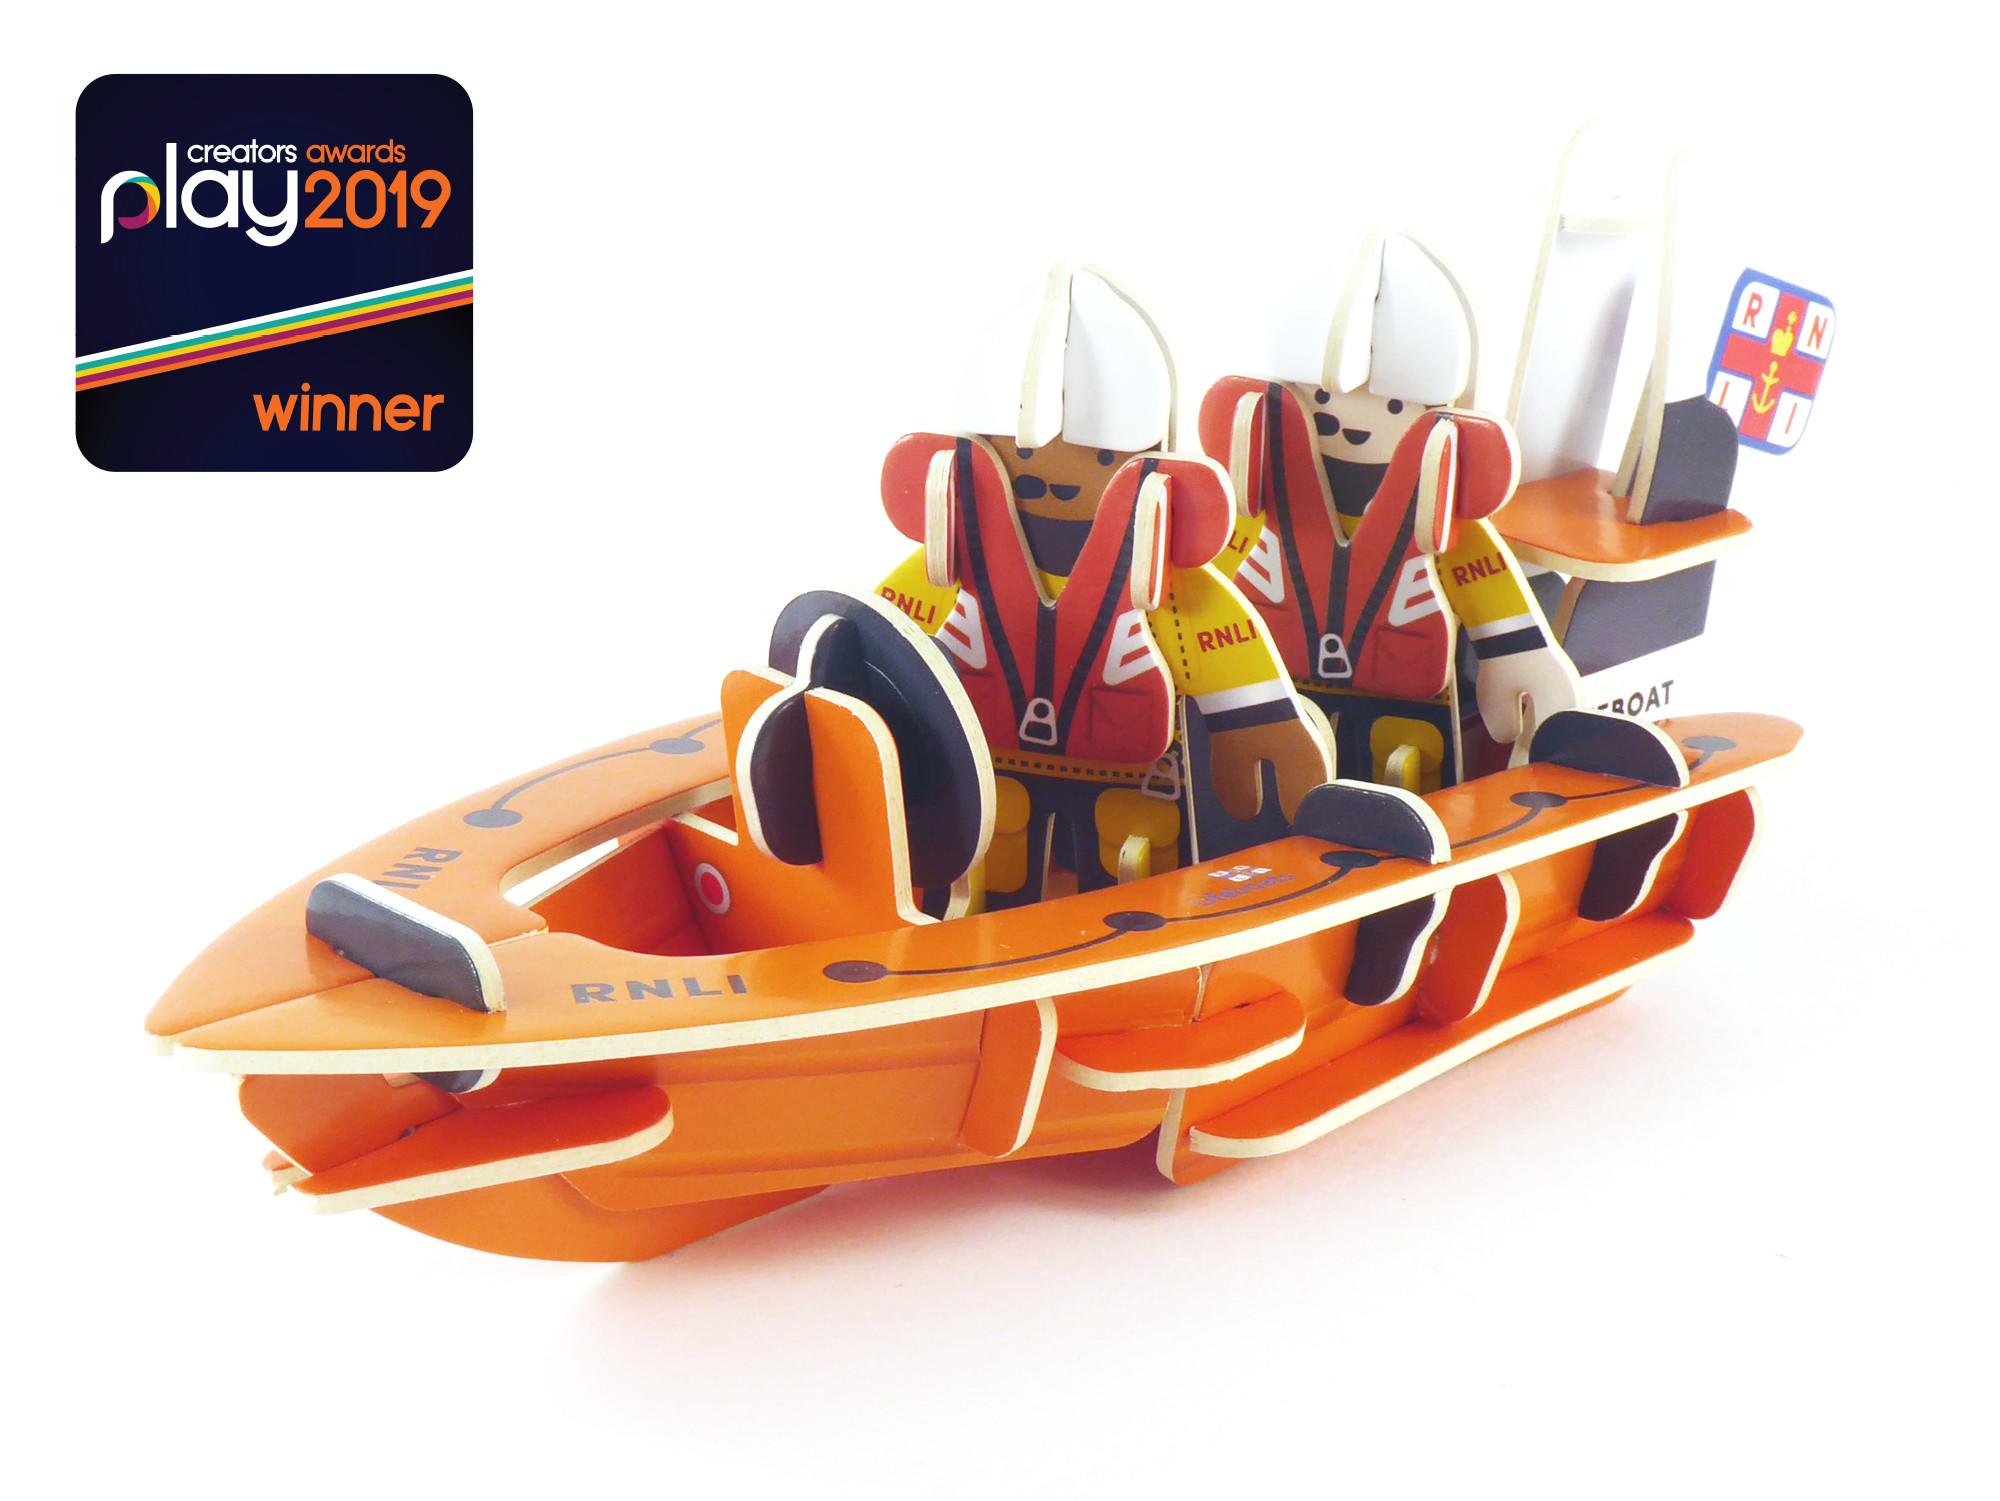 Play Press orange lifeboat with figures on board